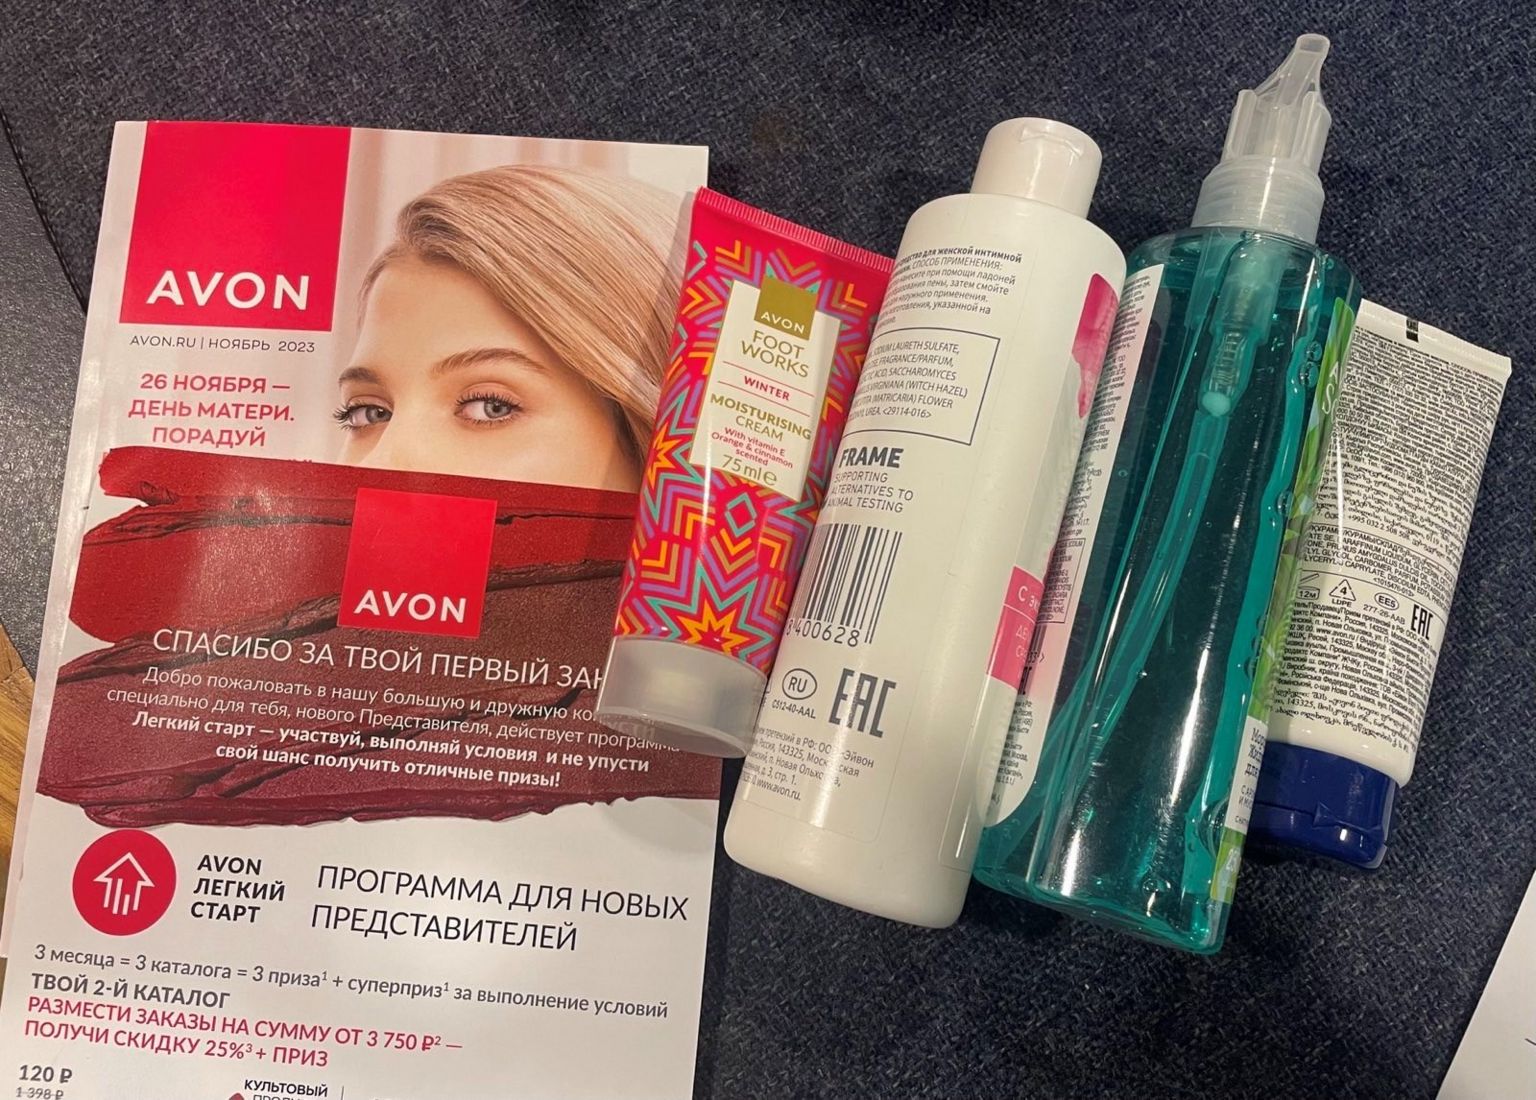 Avon products and promotional materials